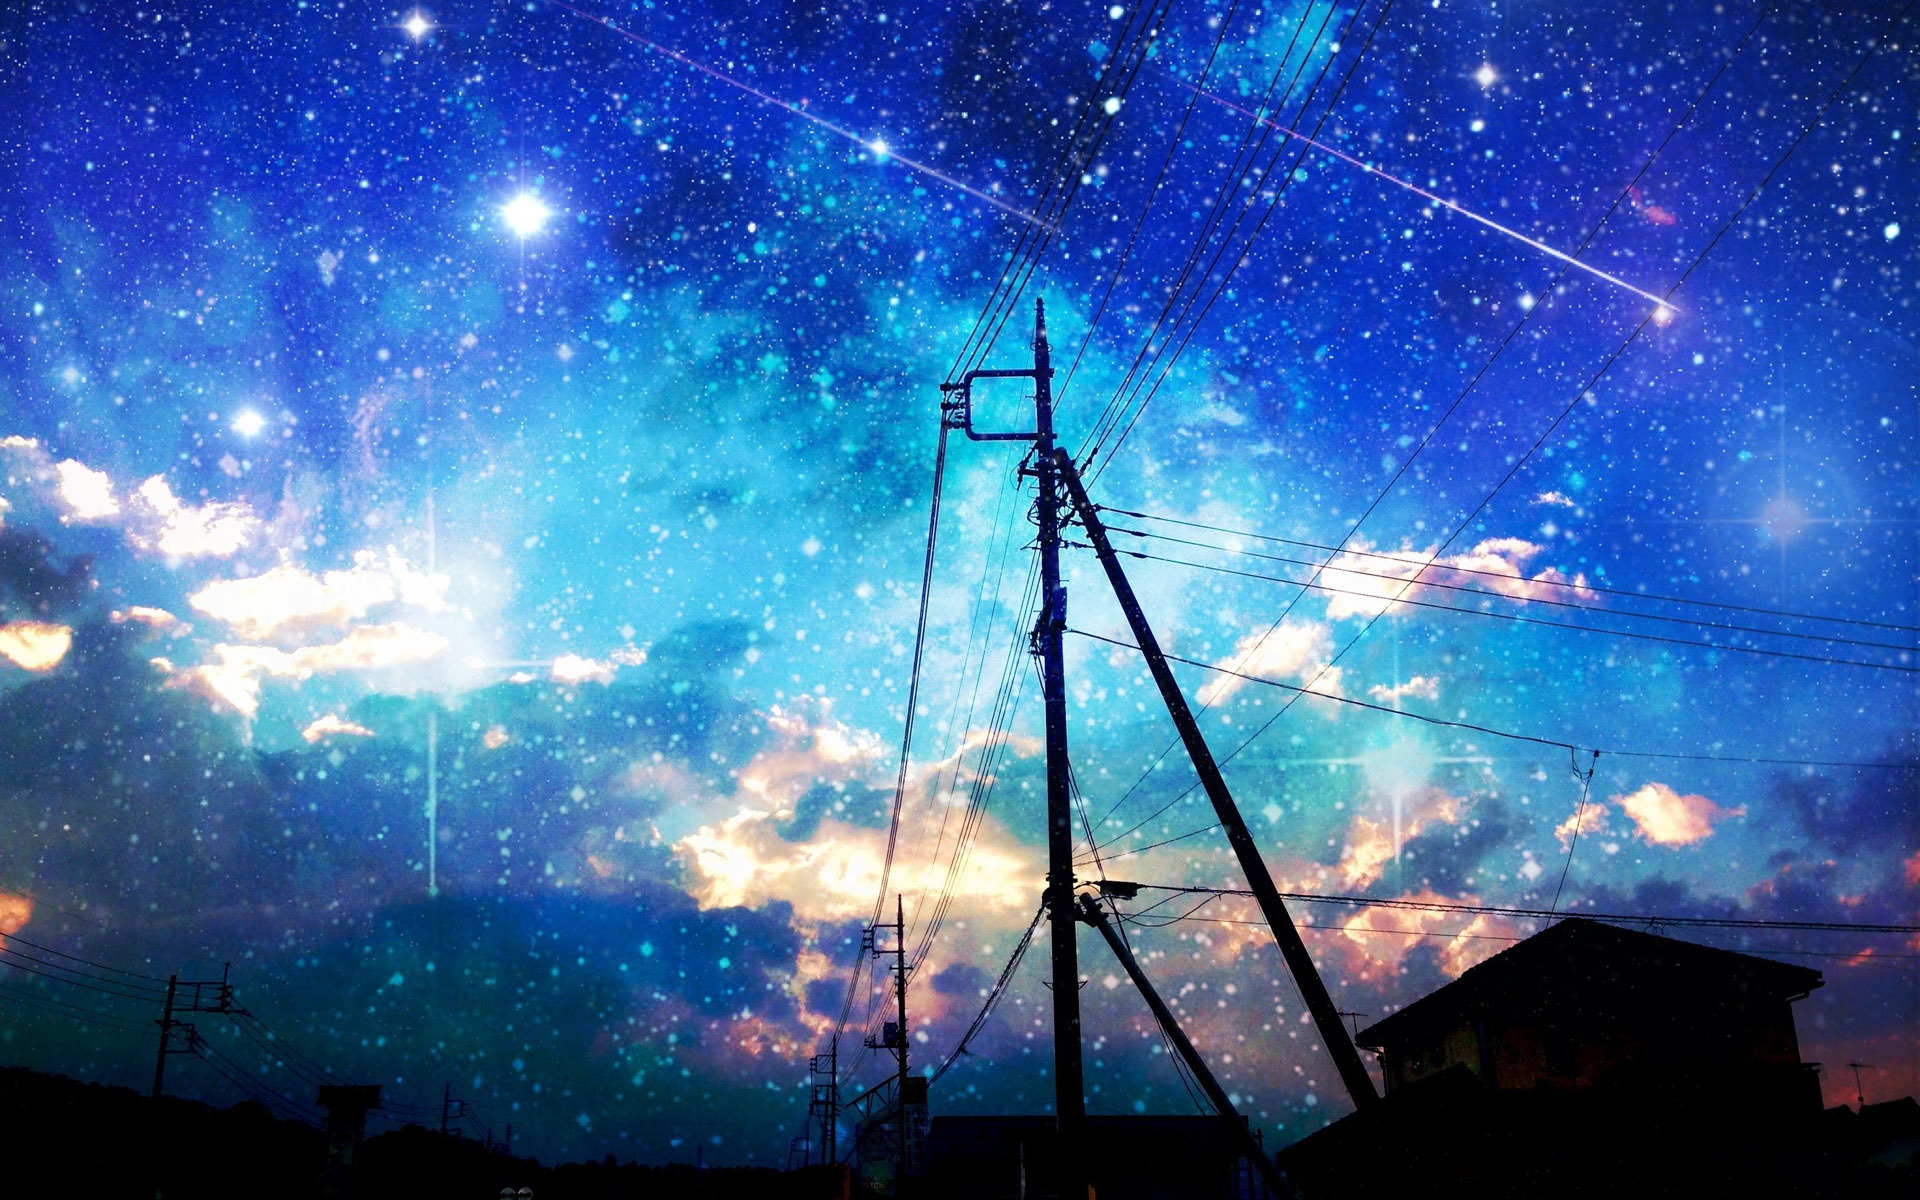 Starry sky over the city wallpaper 19467 1920x1200